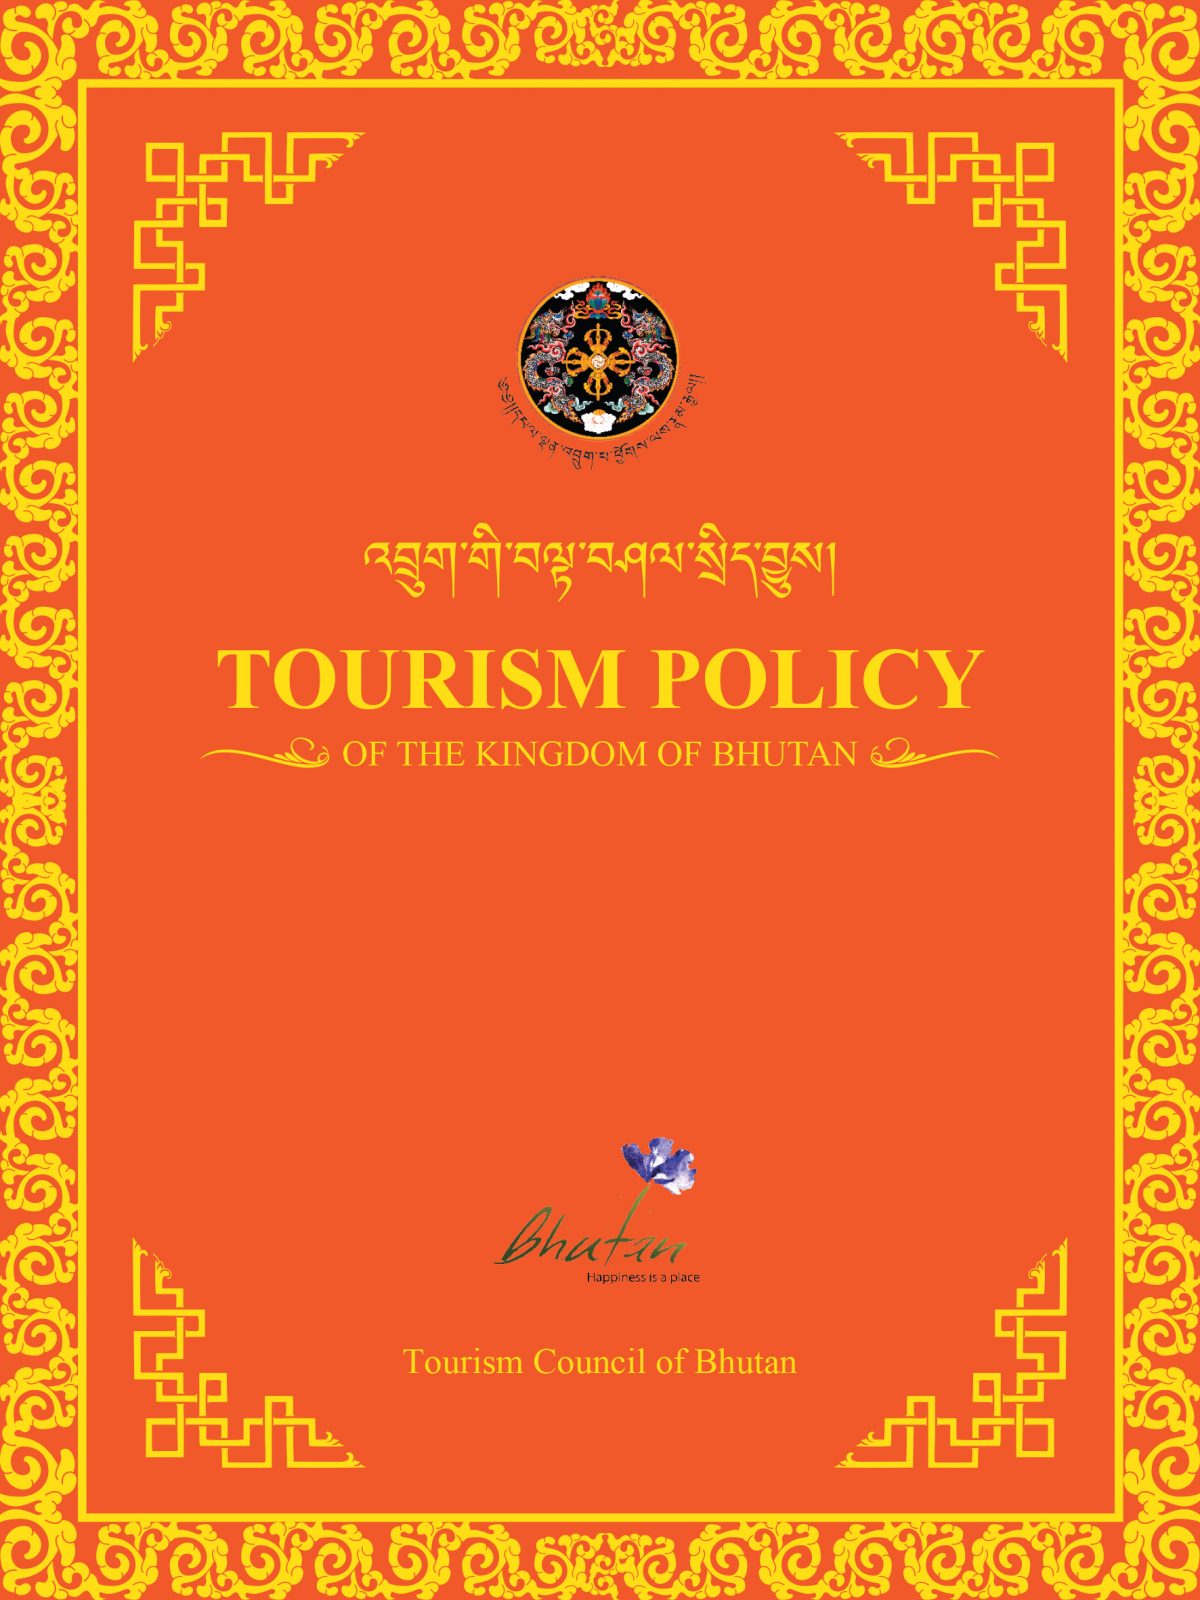 tourism policy articles